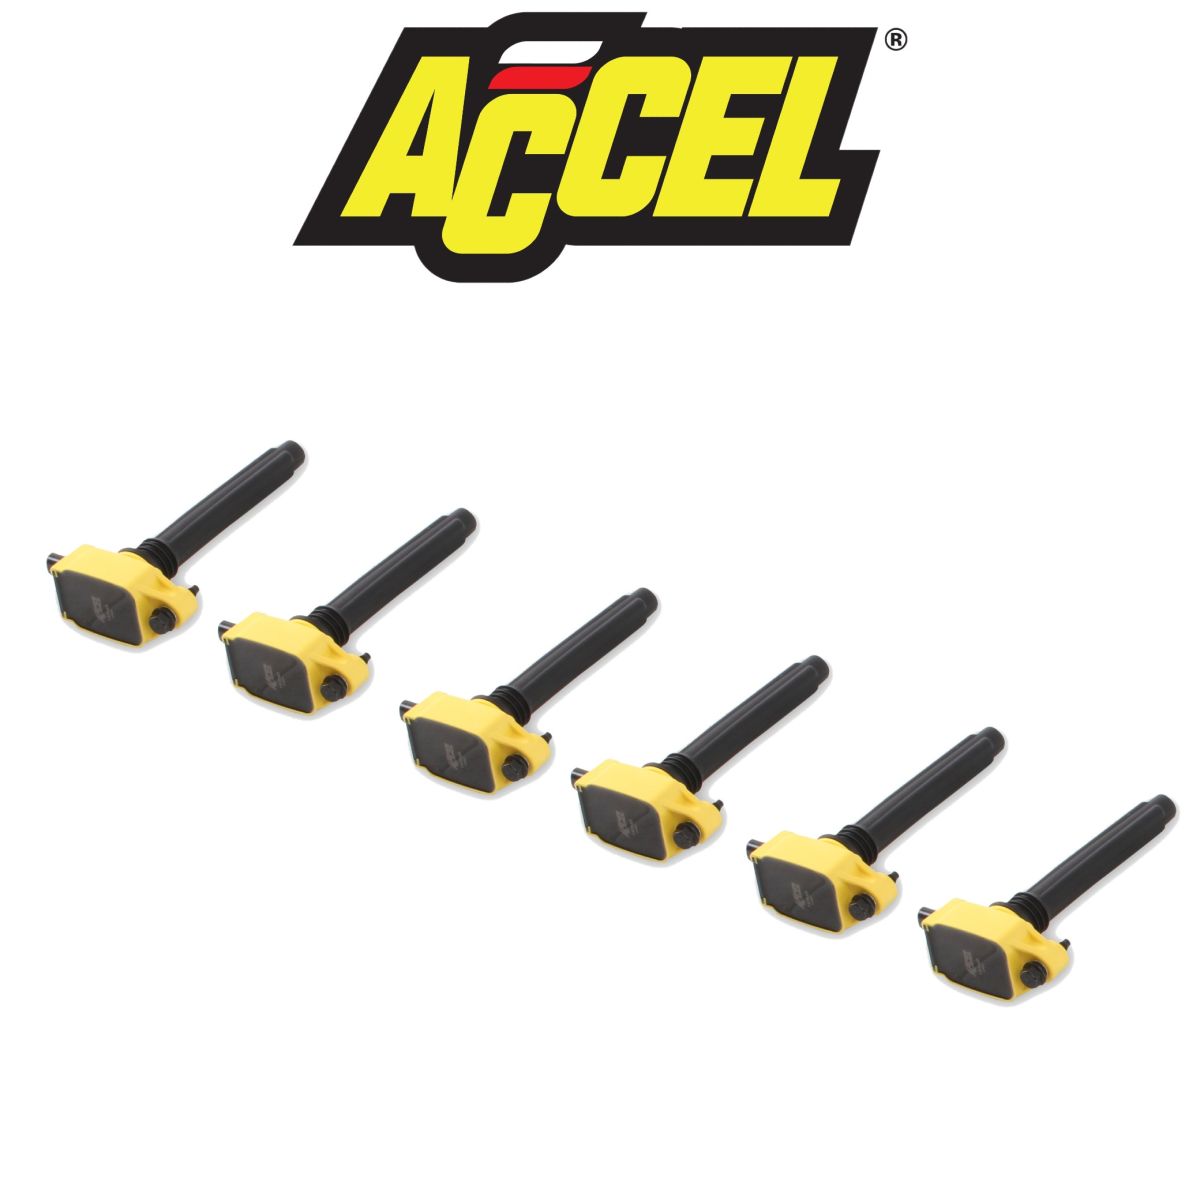 ACCEL - Accel Supercoil Replacement Ignition Coil Set For 11-21 Chrysler/Dodge/Jeep 3.6L